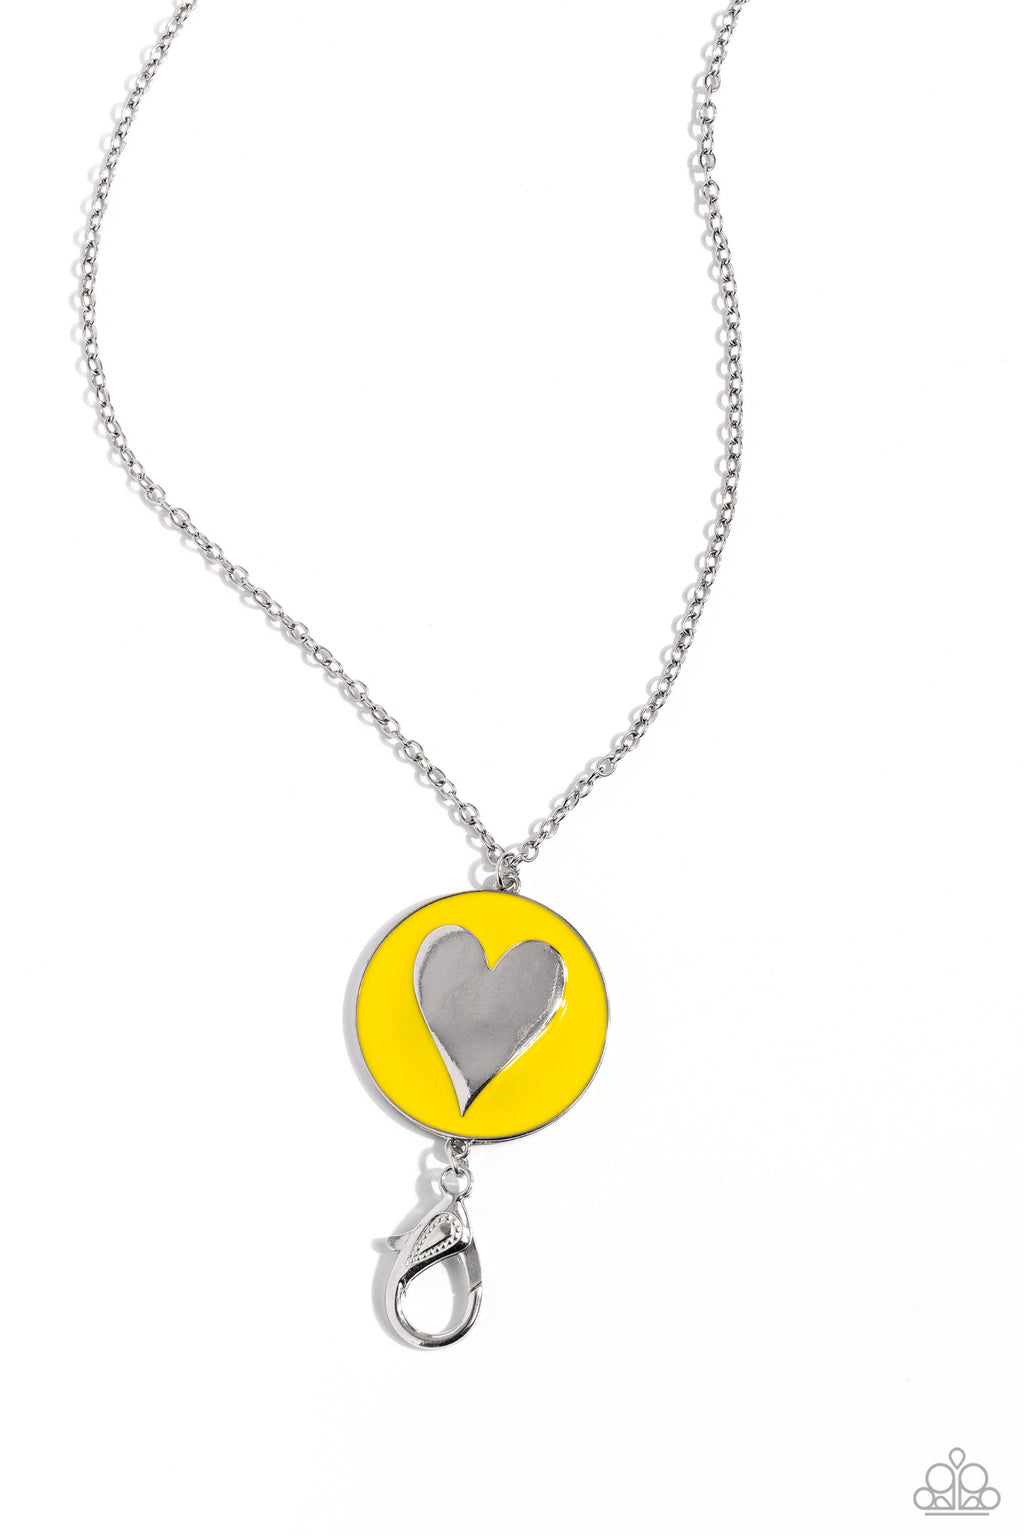 five-dollar-jewelry-true-to-your-heart-yellow-lanyard-paparazzi-accessories